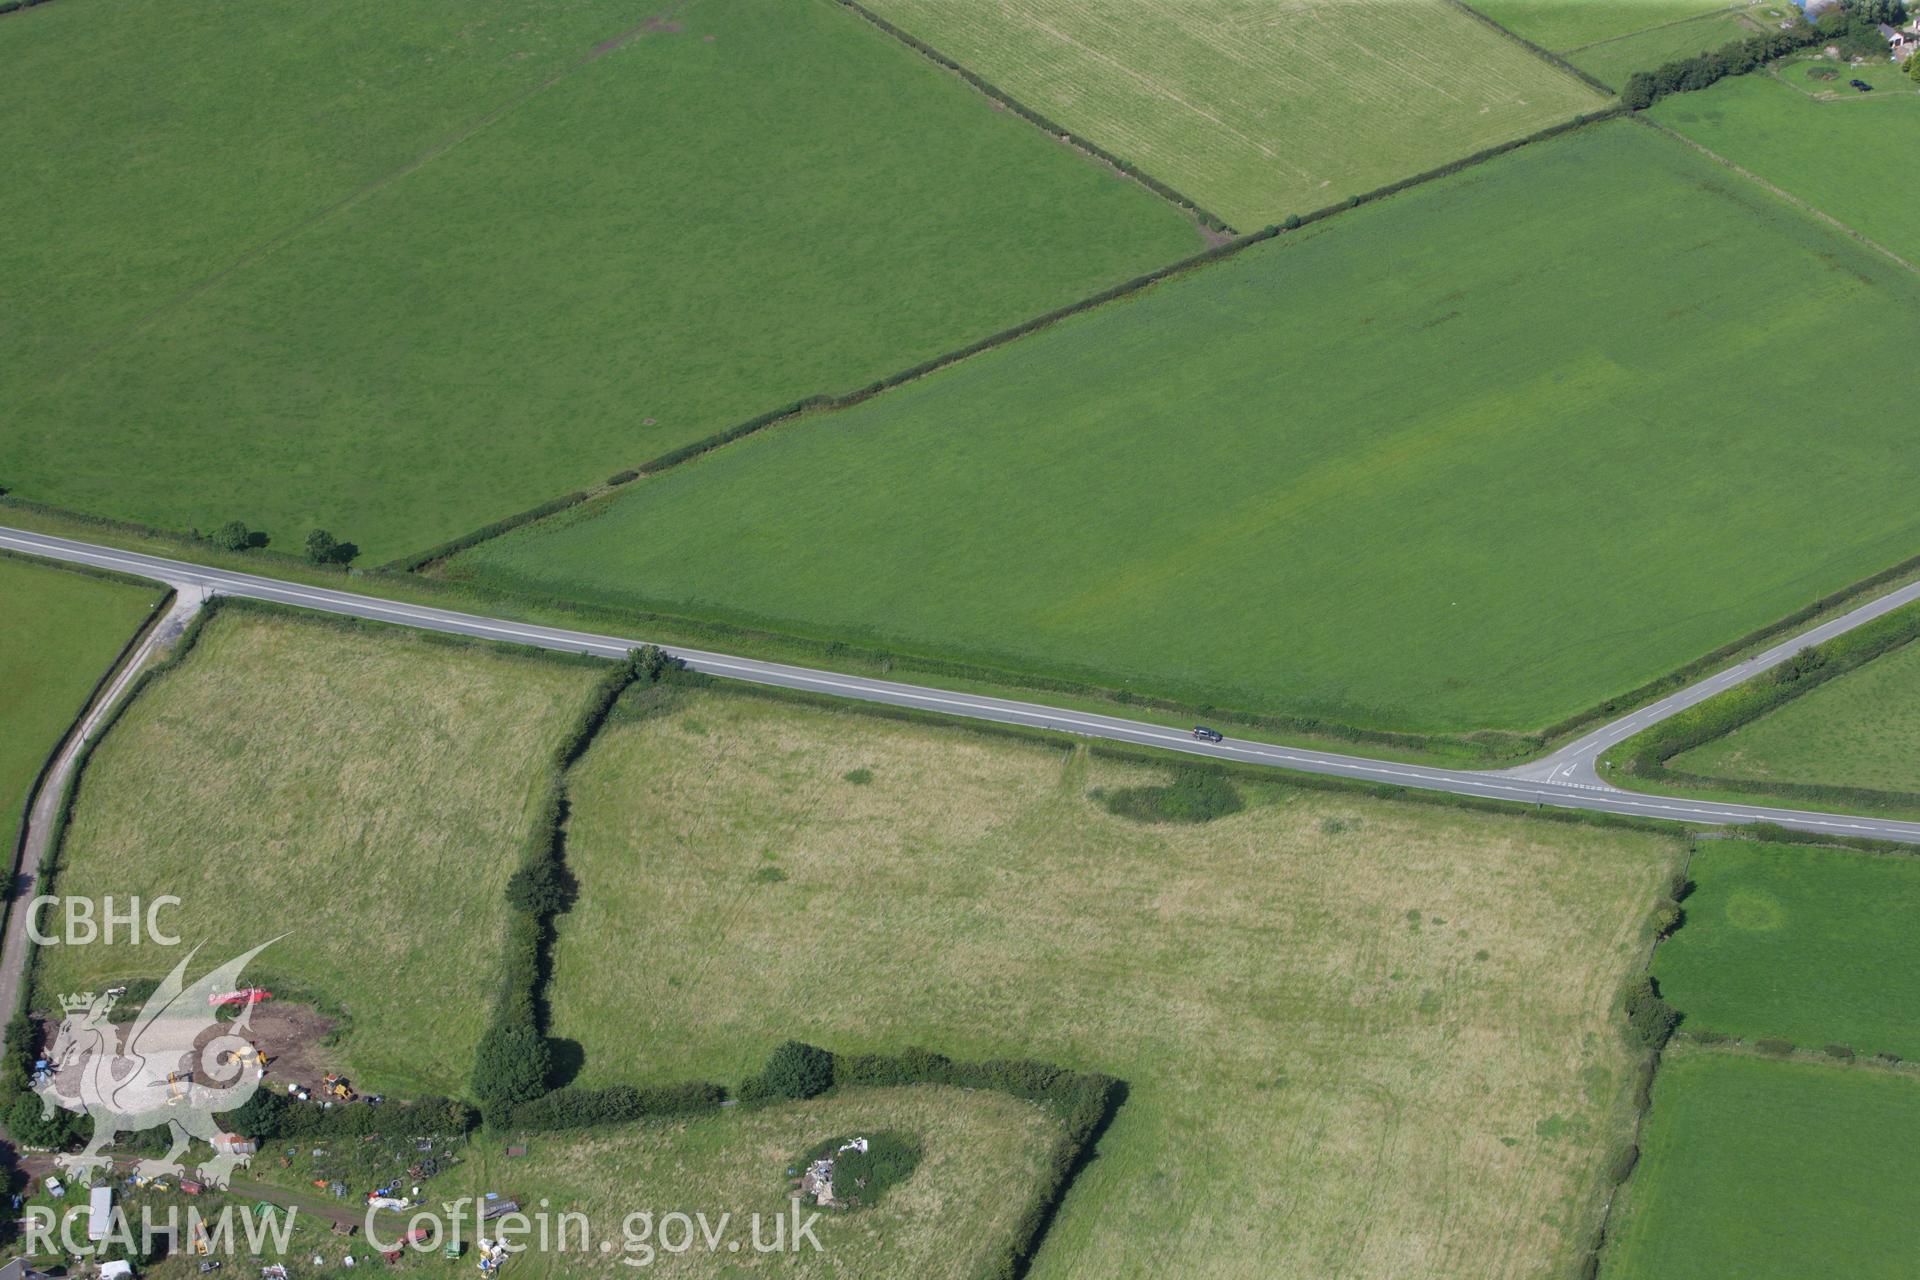 RCAHMW colour oblique aerial photograph of a section of Offa's Dyke or Whitford Dyke east of Trelawnyd. Taken on 30 July 2009 by Toby Driver